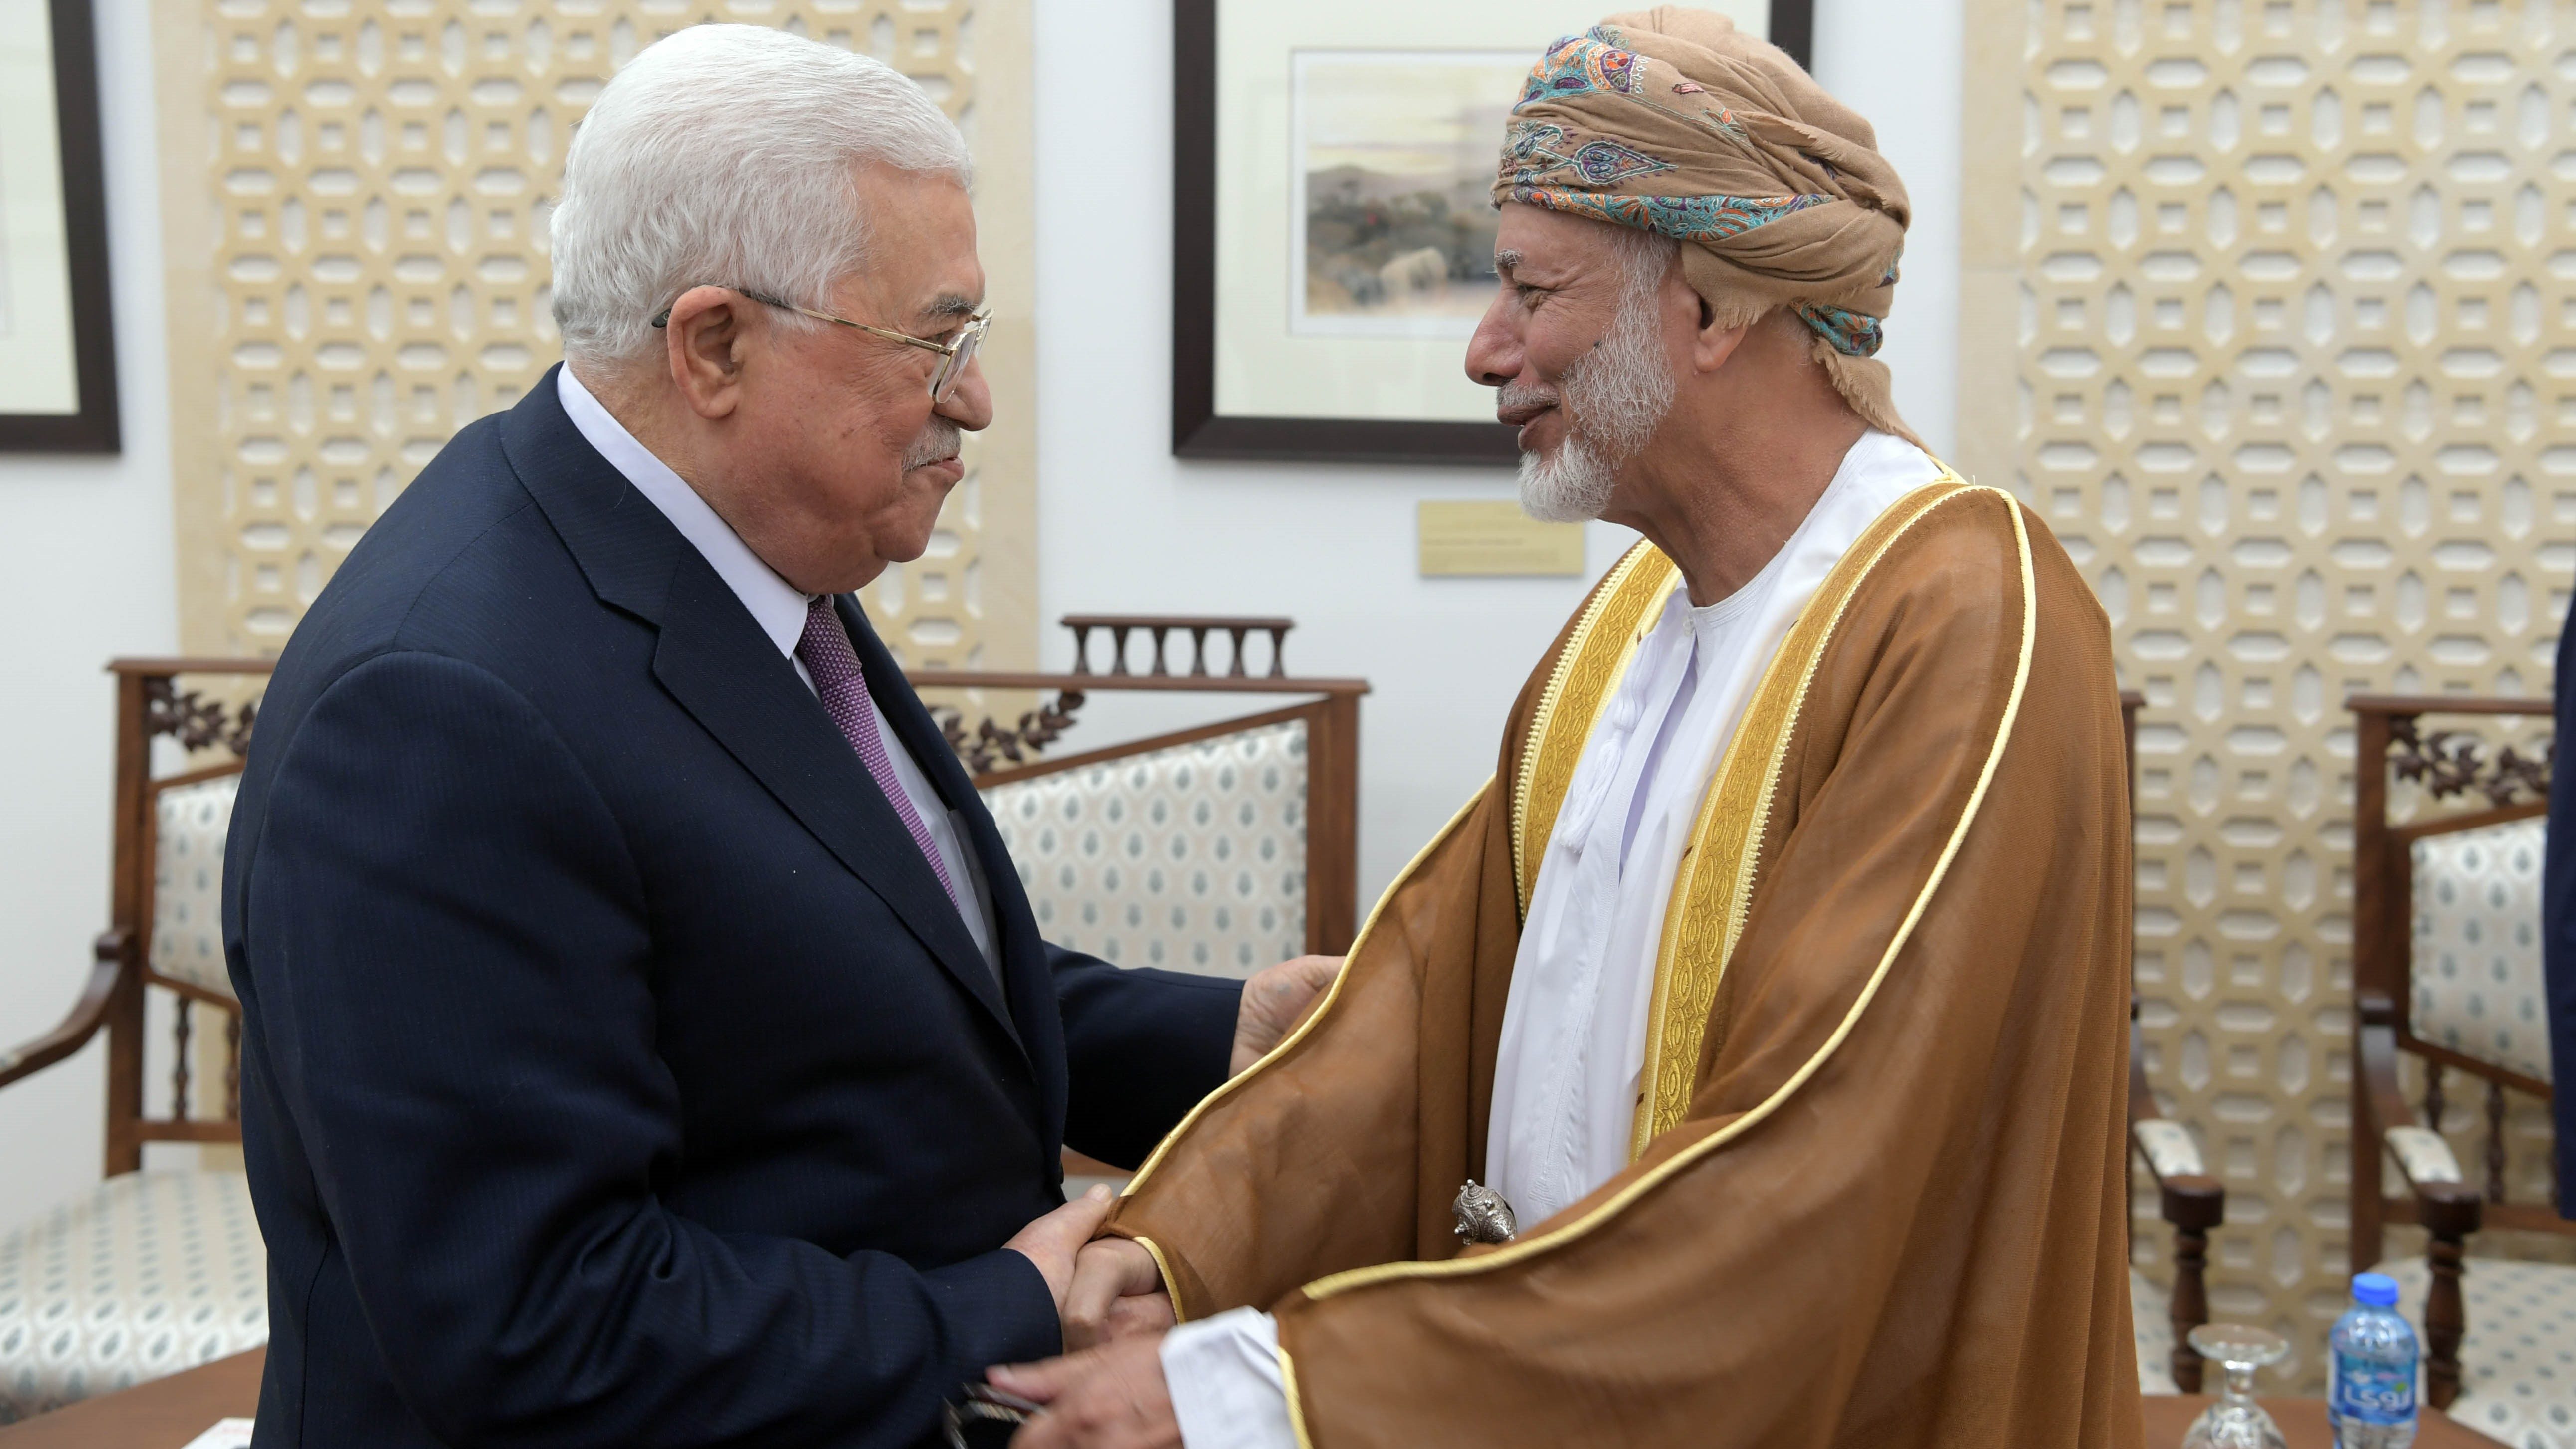 Oman to Open Embassy in West Bank, its Foreign Ministry Says